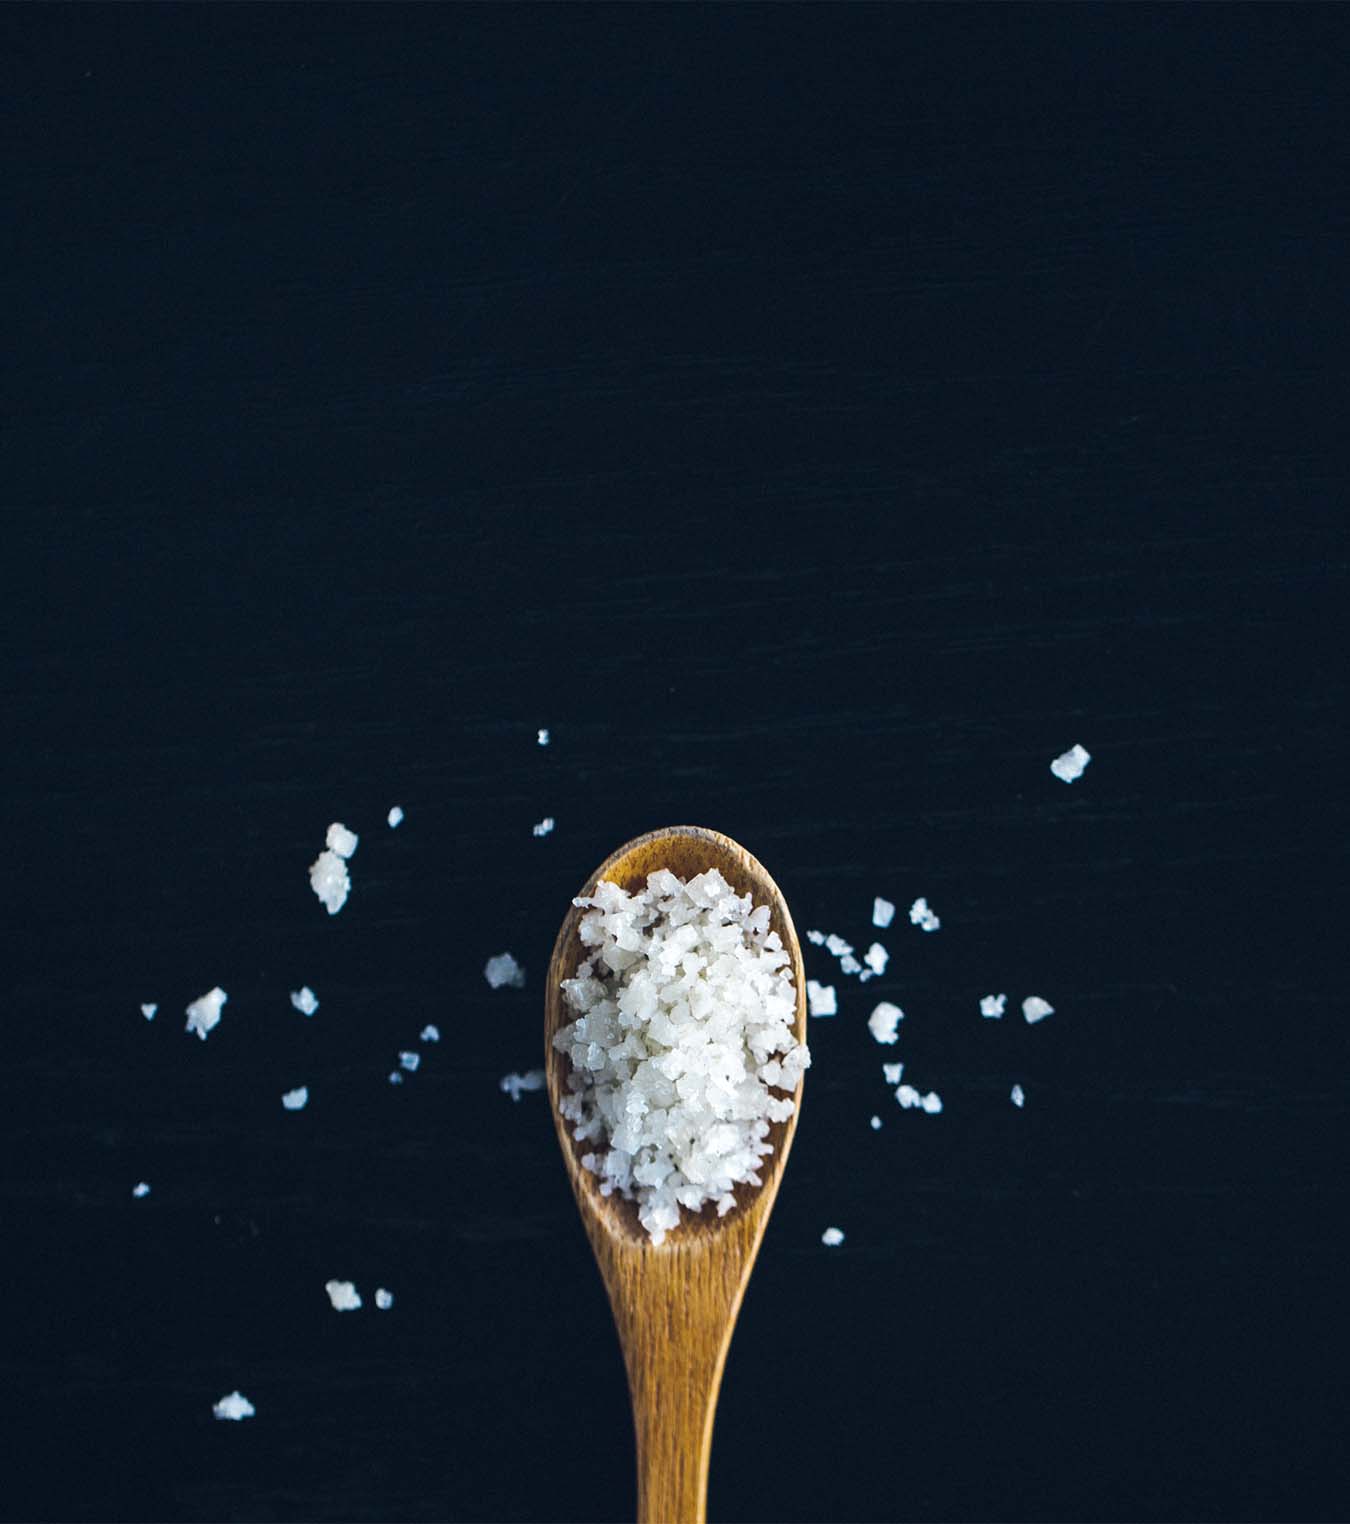 Rock salt on a wooden spoon placed on a black background.